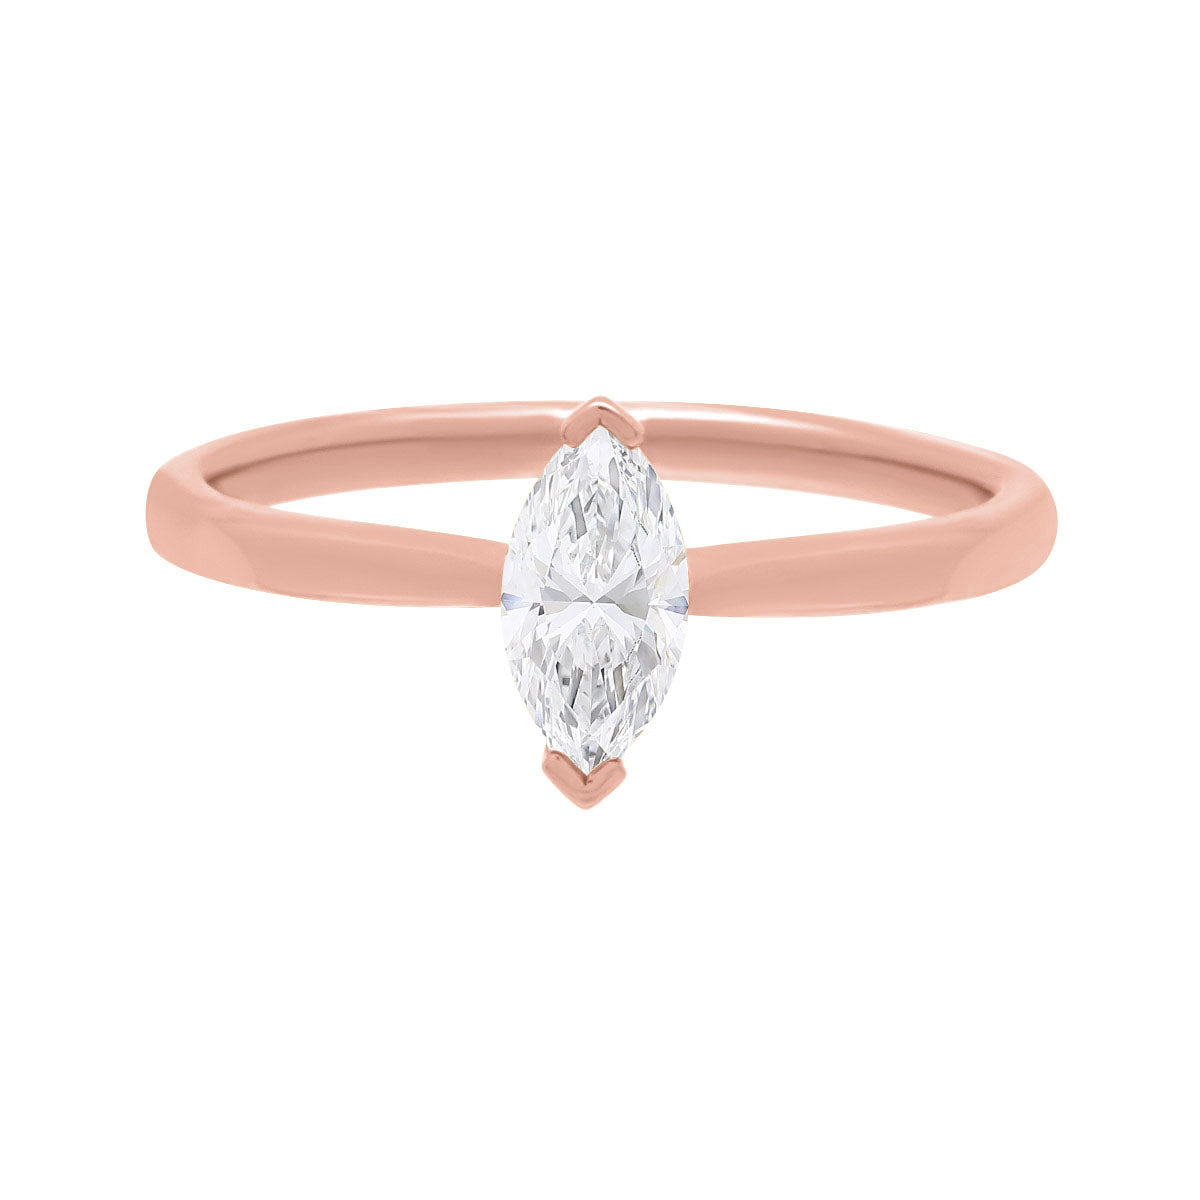 Marquise Shape diamond engagement ring in rose gold